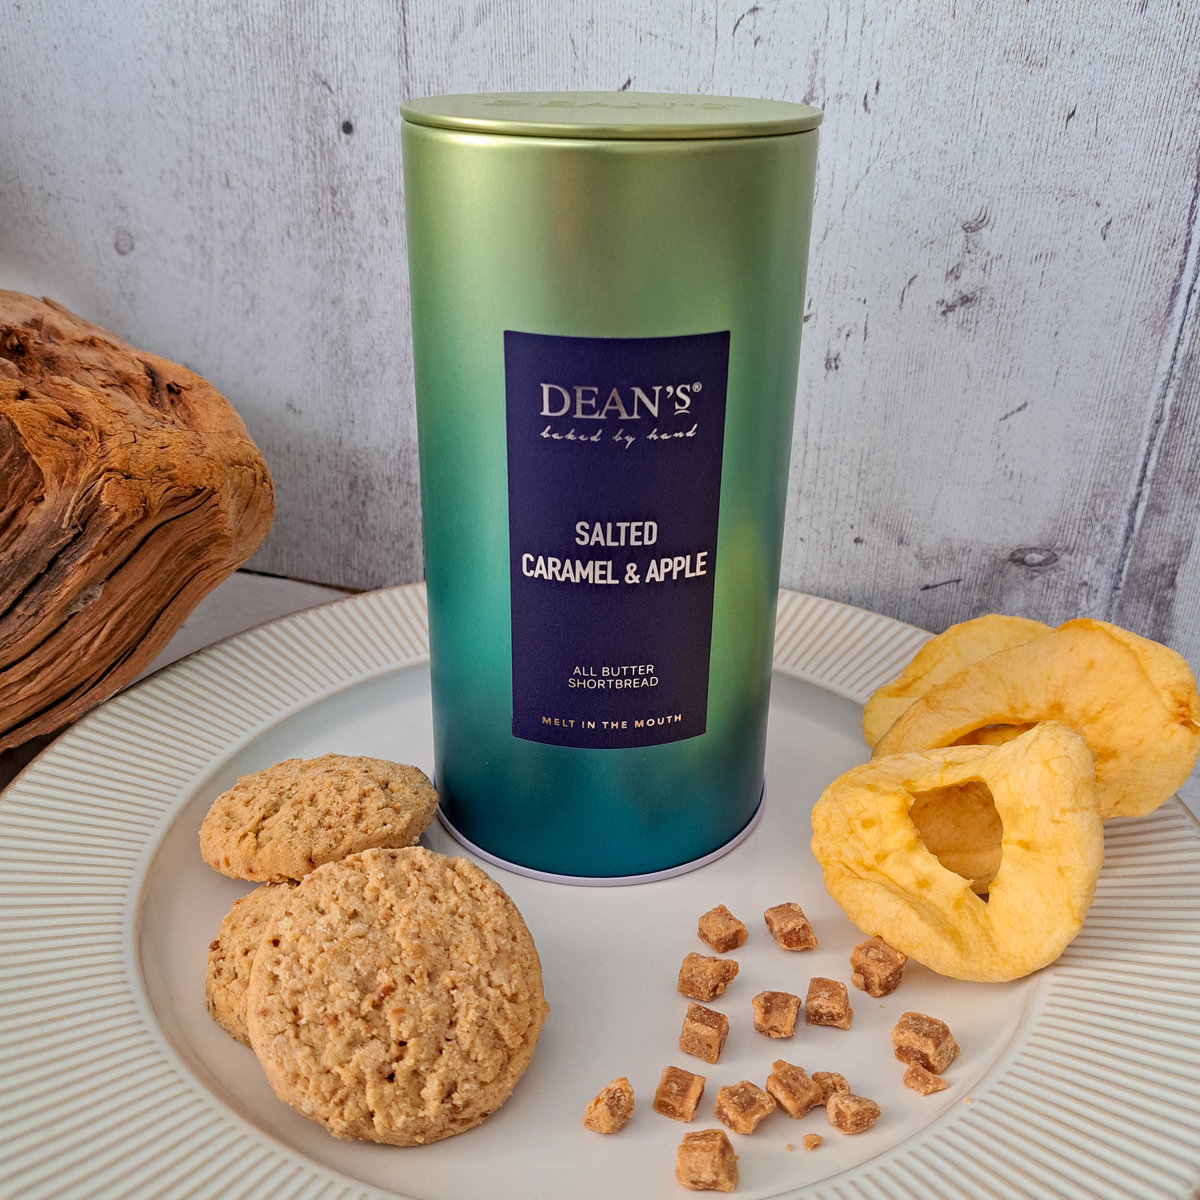 Buy the Salted Caramel & Apple Shortbread 150g online at Dean's